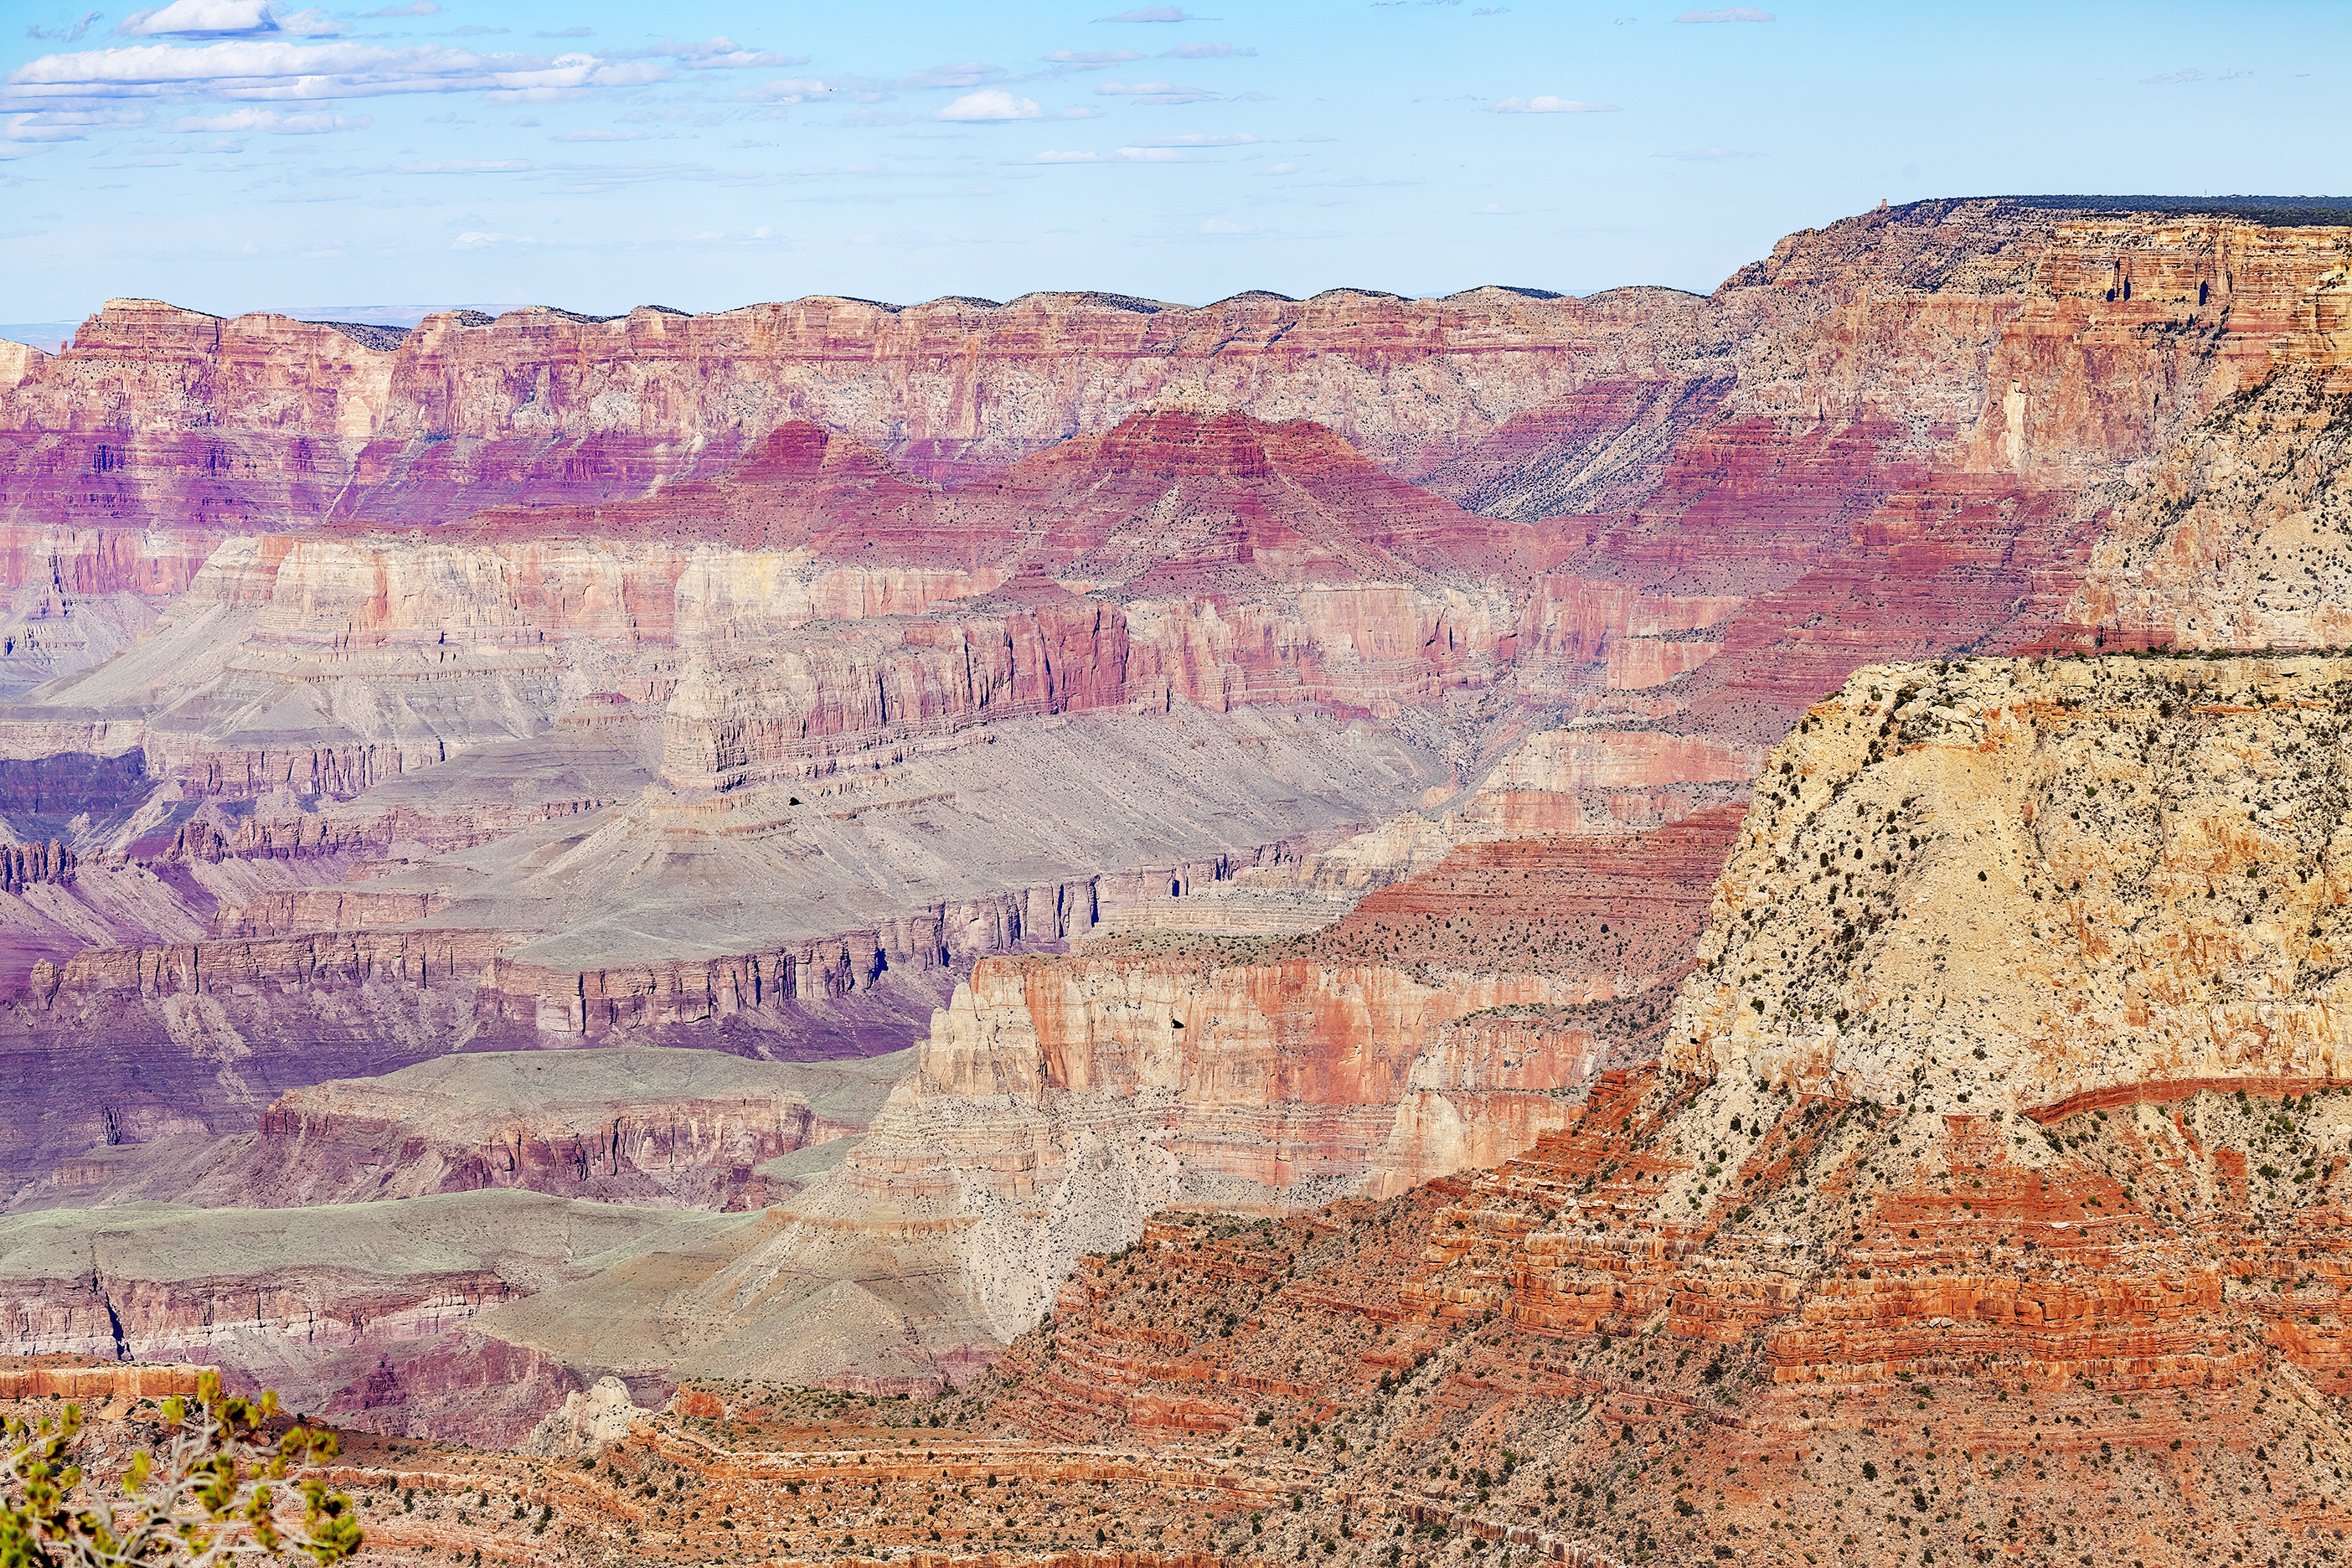 Landscapes America South Rim 5 Mohave Point Hermit Road Grand Canyon Arizona USA Oct 2014 03